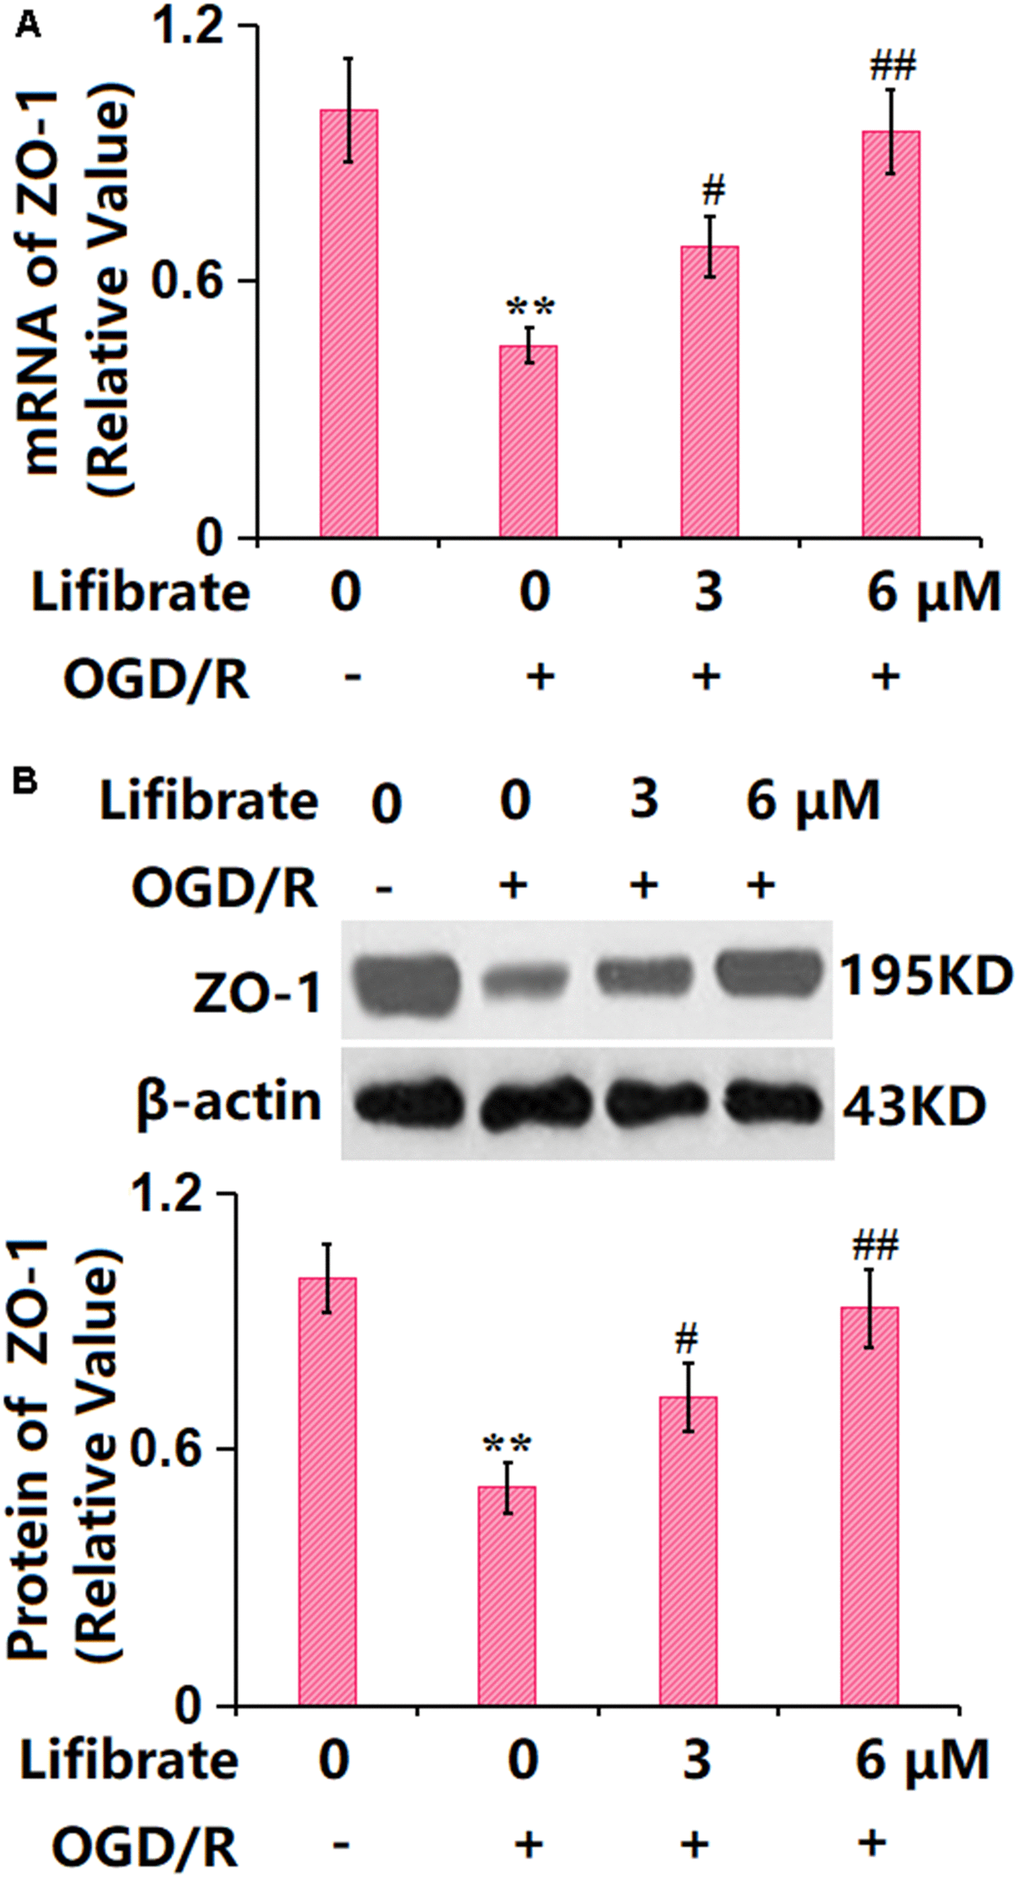 Lifibrate reserved expression of the tight junction protein ZO-1 against OGD/R in bEnd.6 cells. Cells were exposed to hypoxic conditions for 6 h, followed by exposure to reperfusion media for 24 h in the presence or absence of Lifibrate (3, 6 μM). (A) mRNA of ZO-1; (B) Protein expression of ZO-1 (n=6, **, P